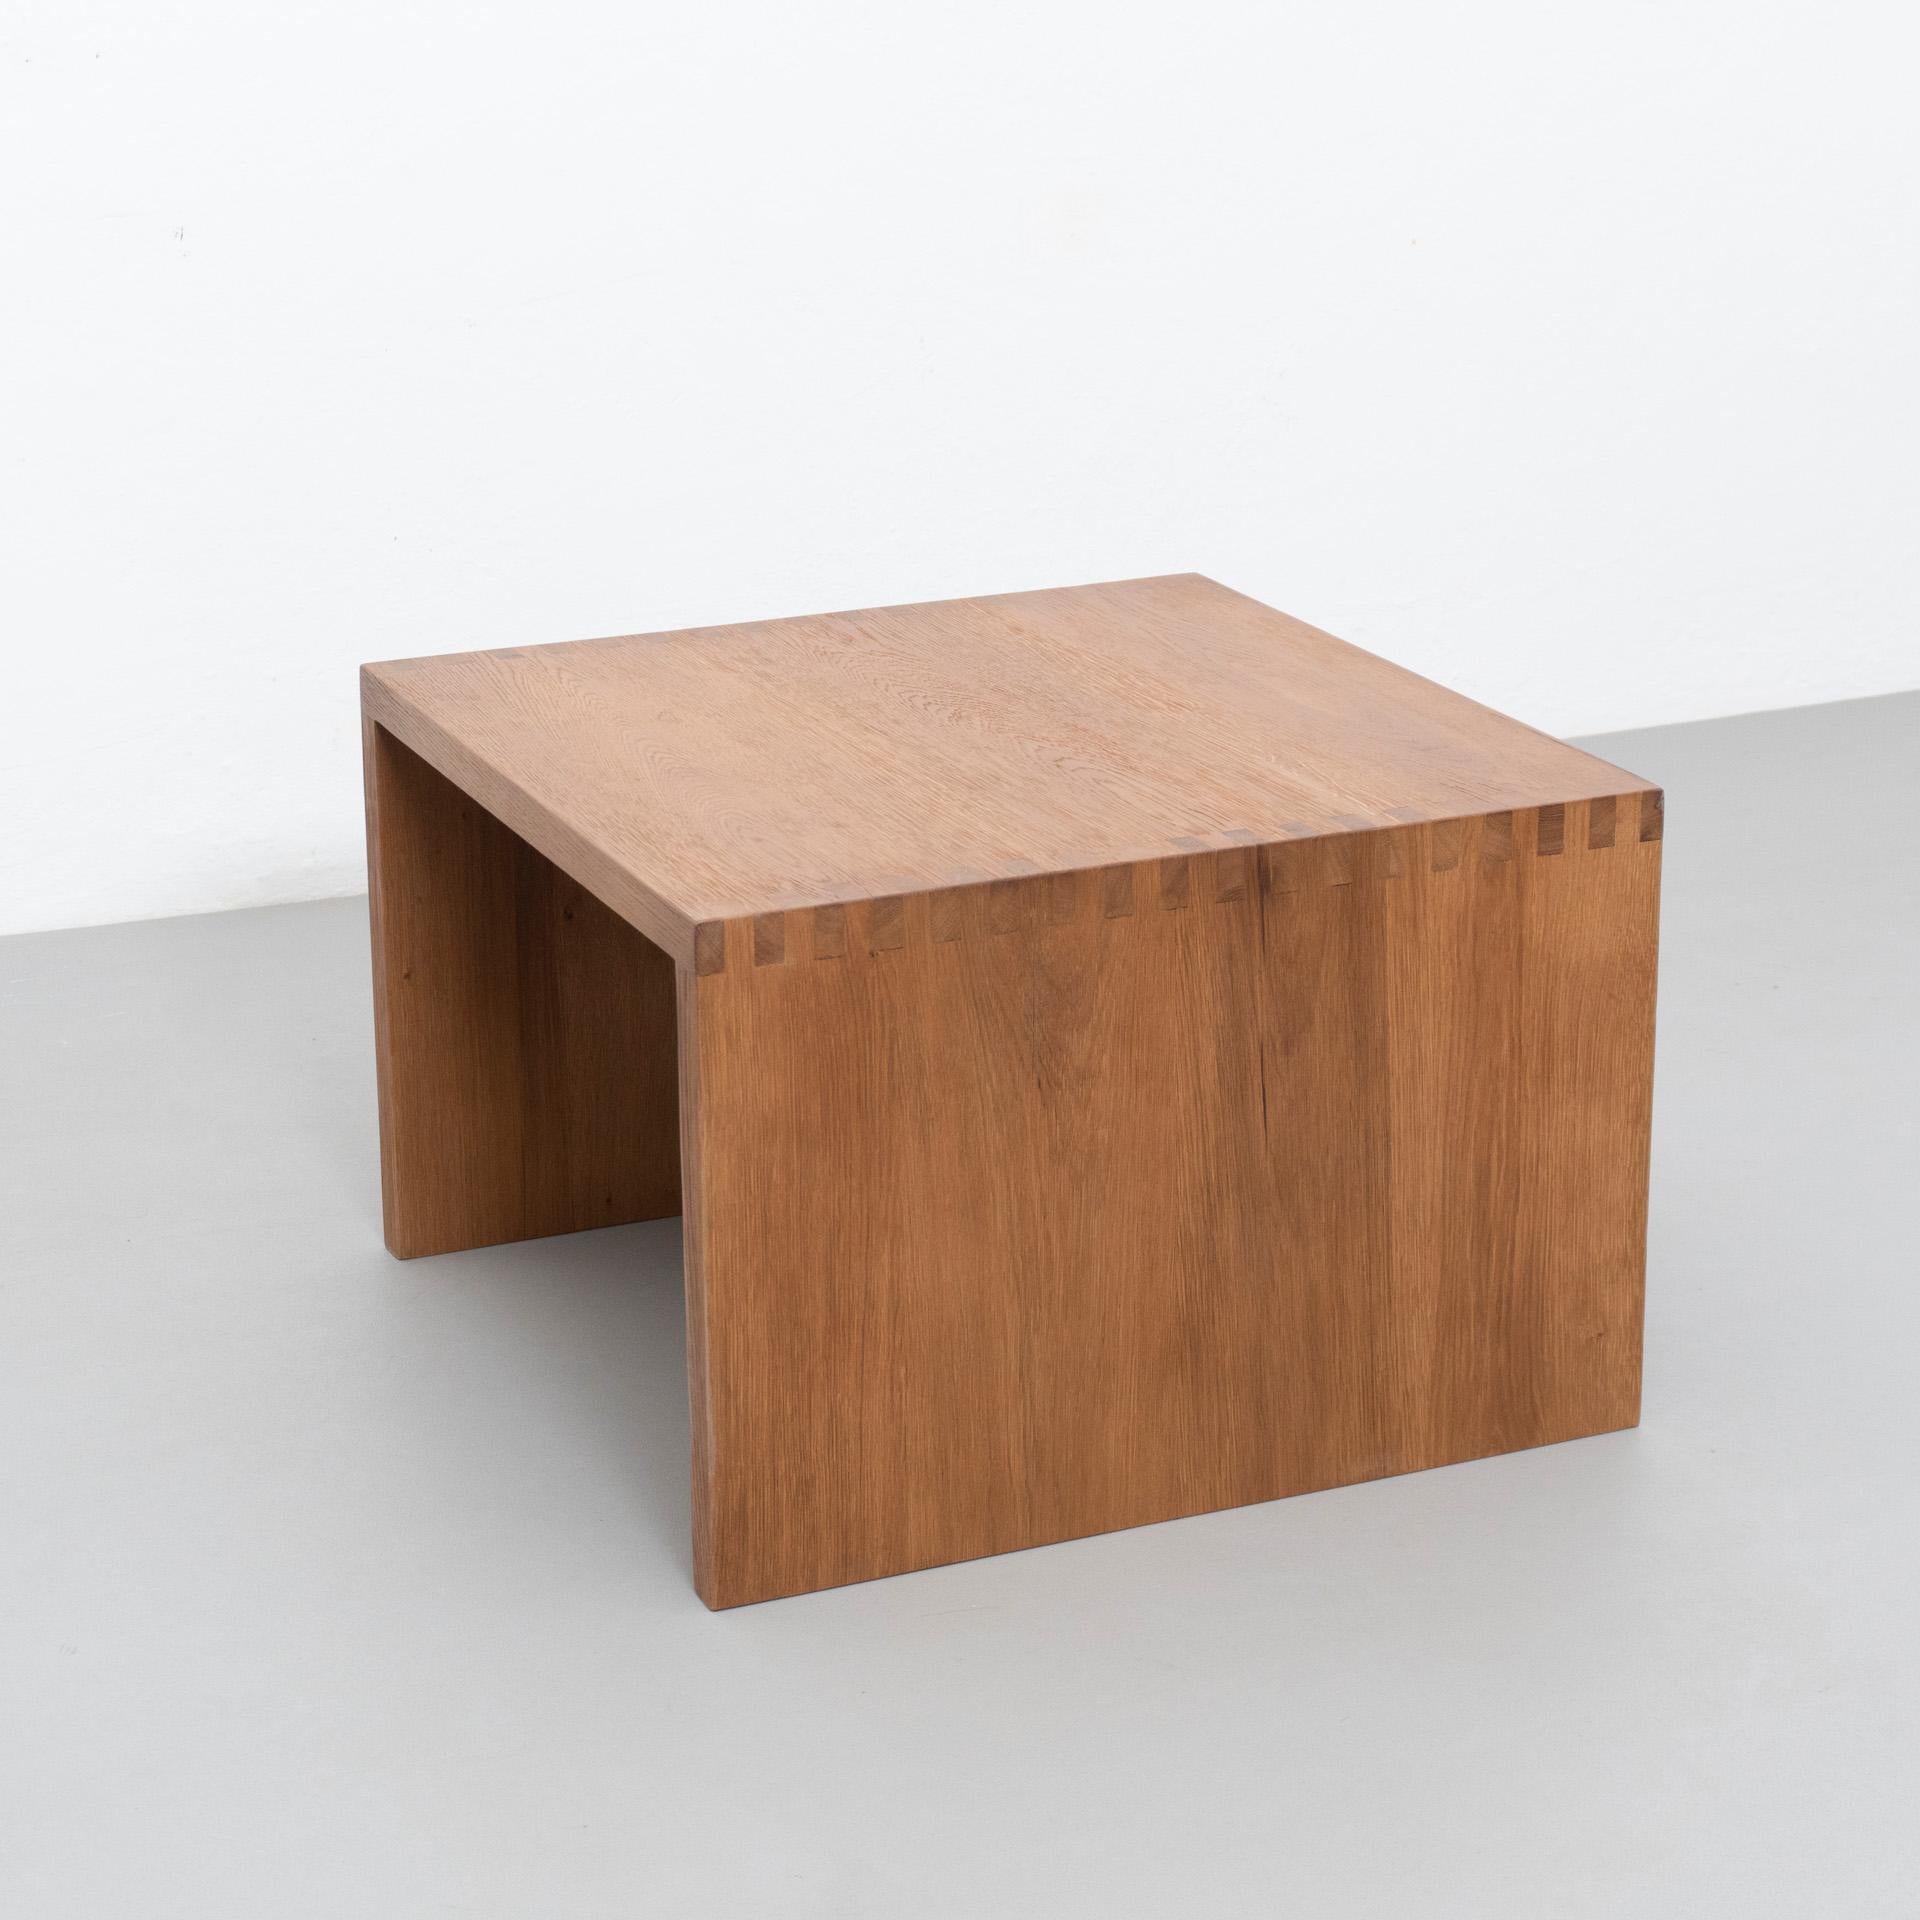 Dada Est. Contemporary Solid Oak Low Table In Good Condition For Sale In Barcelona, Barcelona